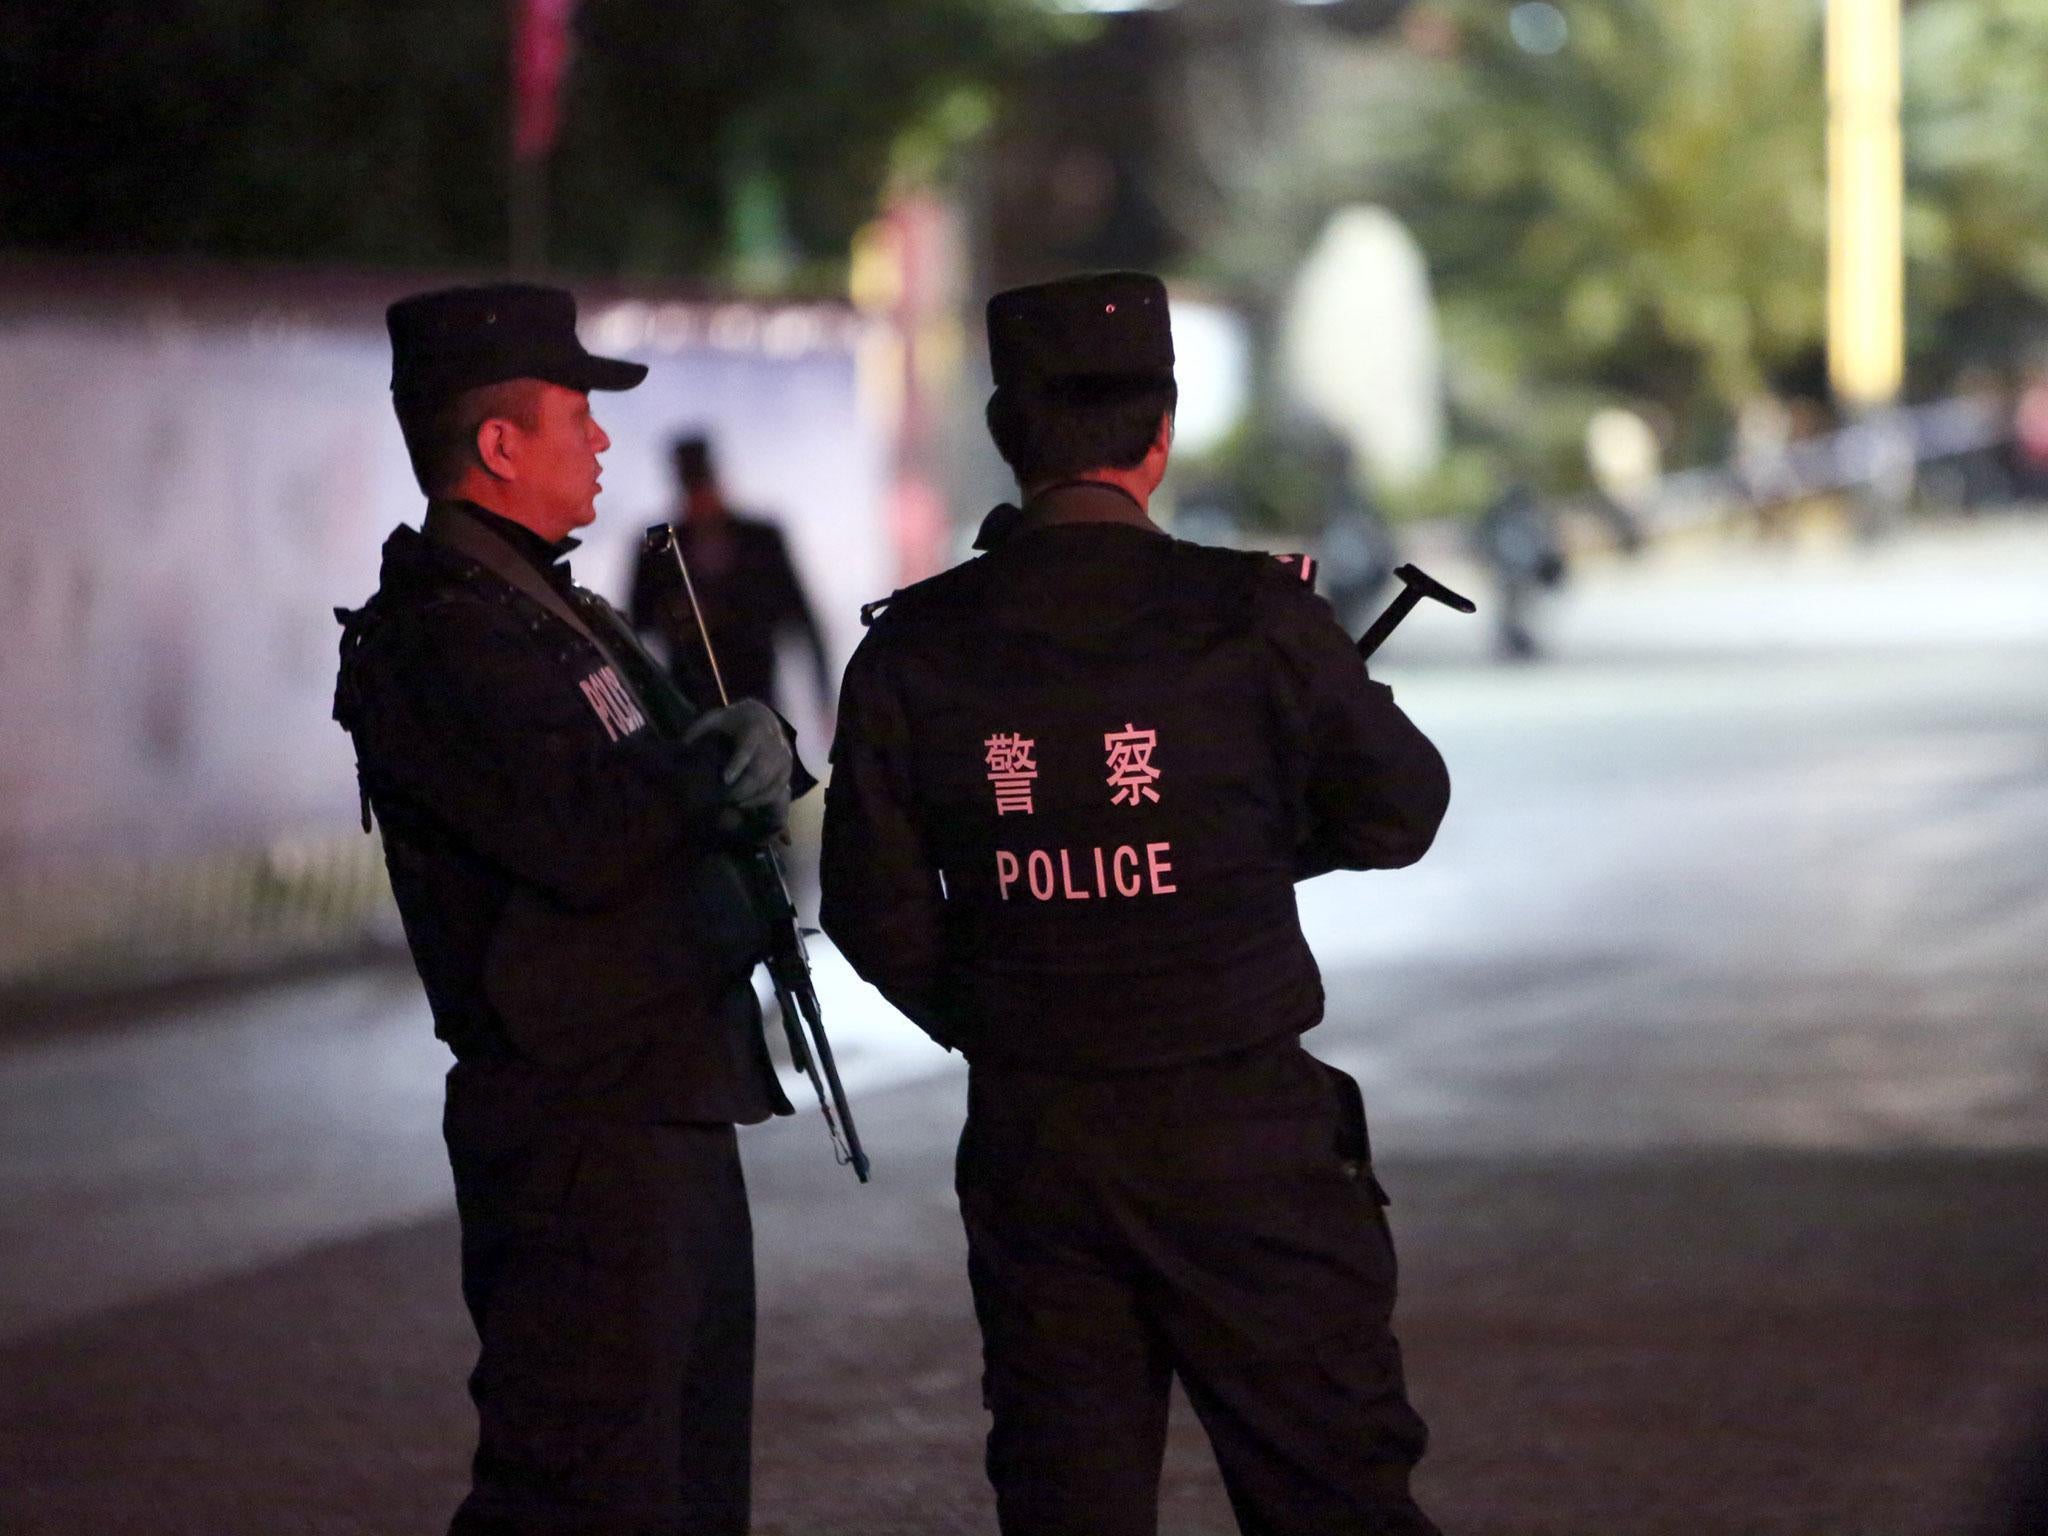 Police in Kunming, where Yang Qingpei was arrested